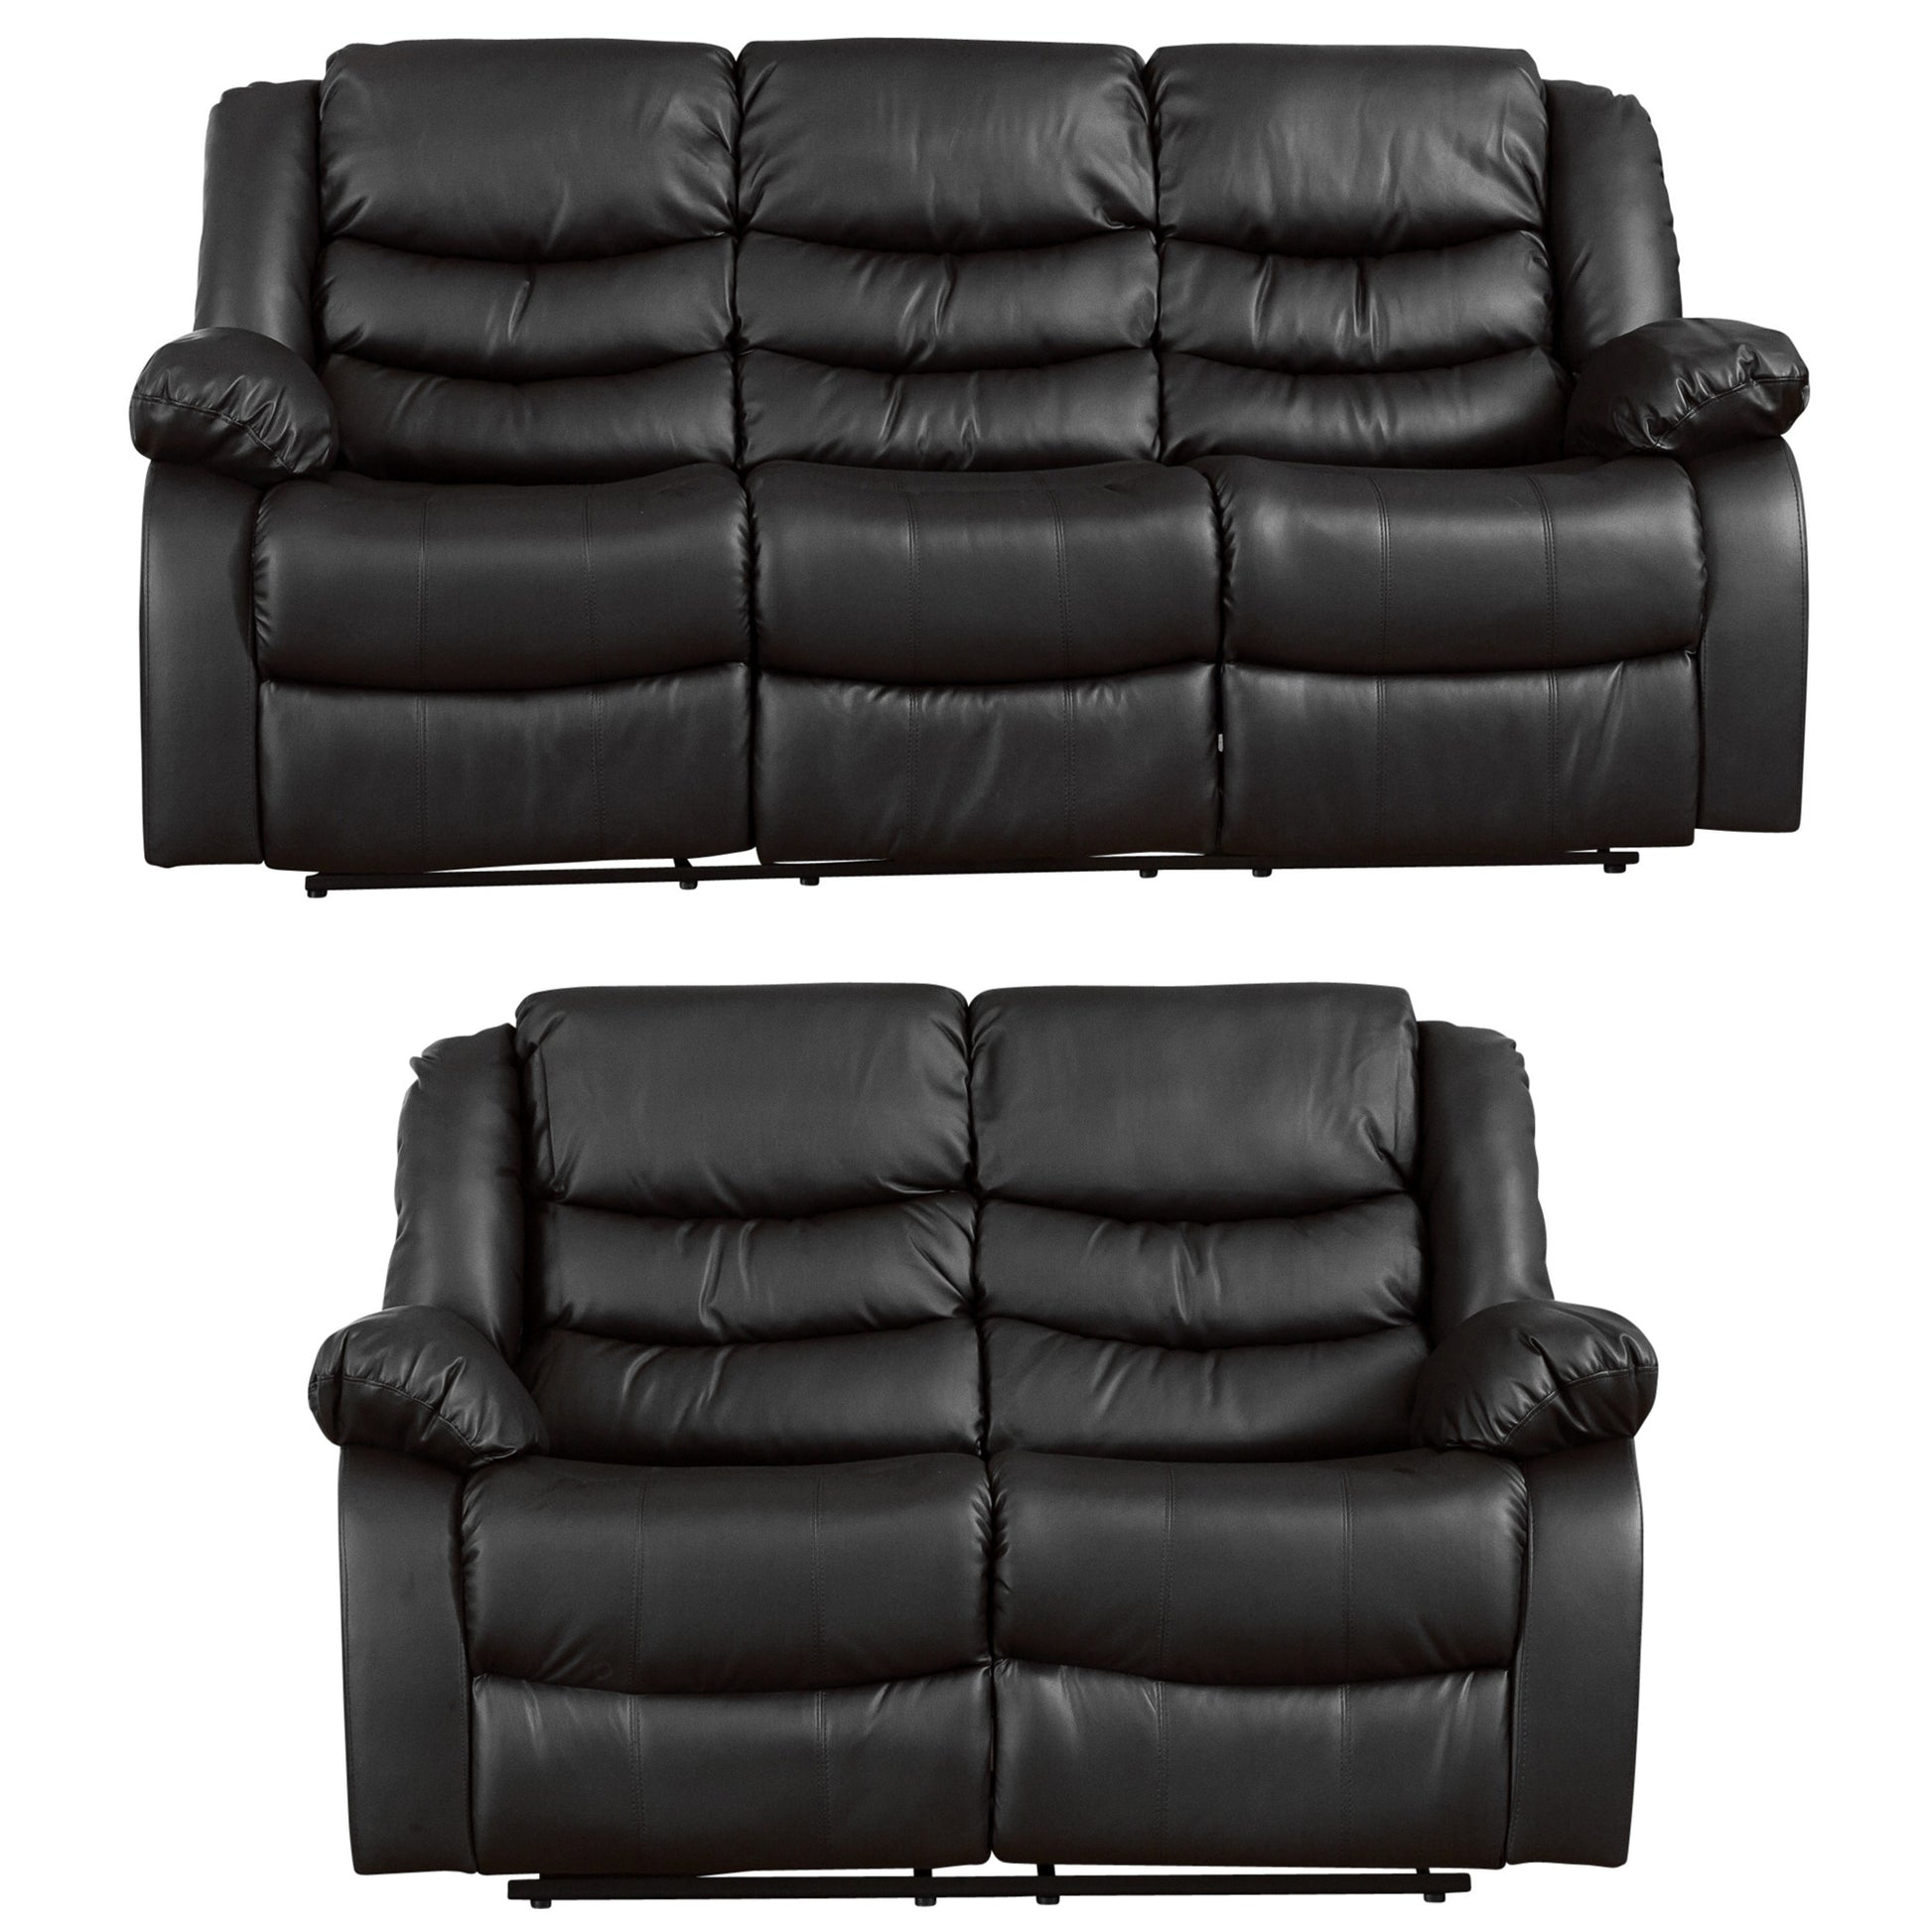 Commercial Grade Leather Recliner Sofa Available in black, brown, cream - CasaFenix